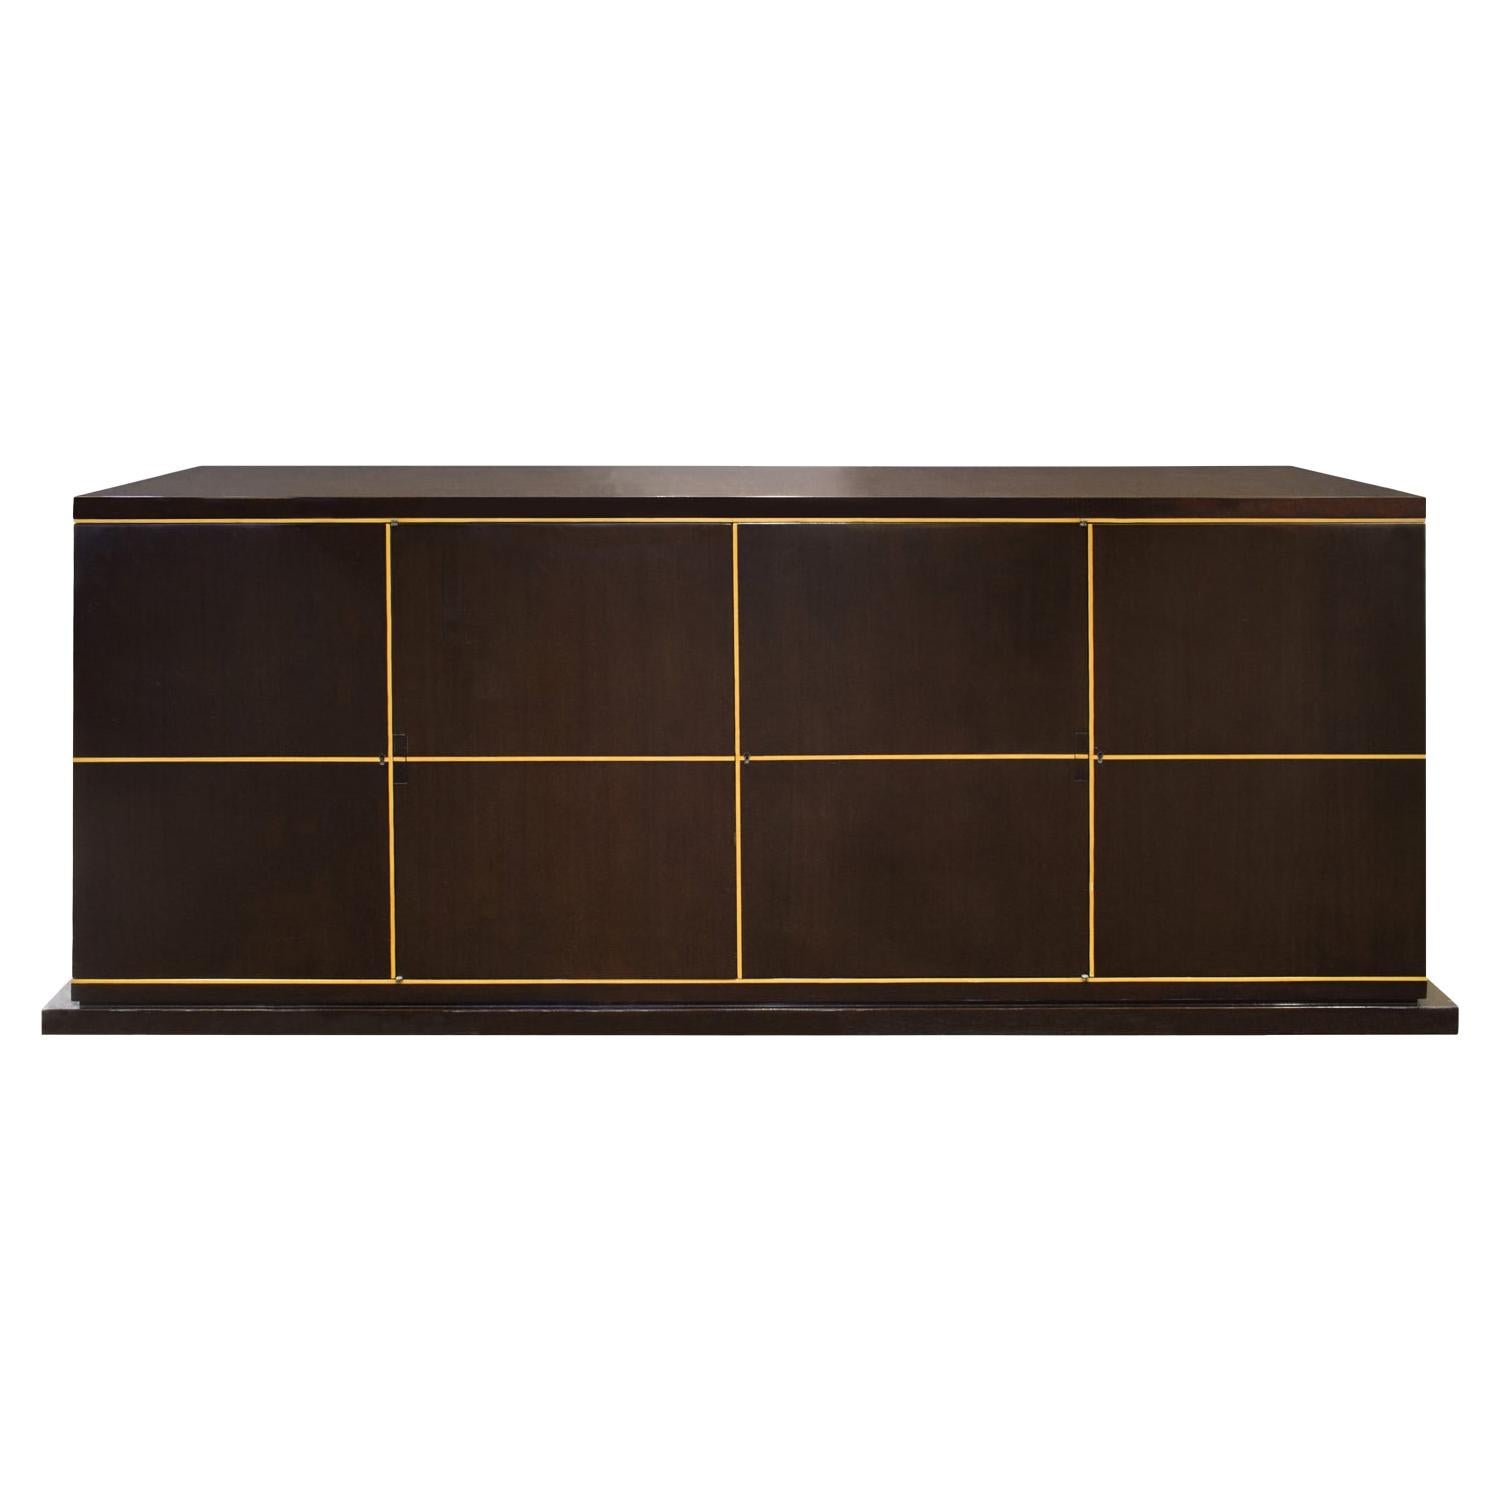 Tommi Parzinger Beautifully Crafted 4-Door Credenza, 1950s 'Signed'